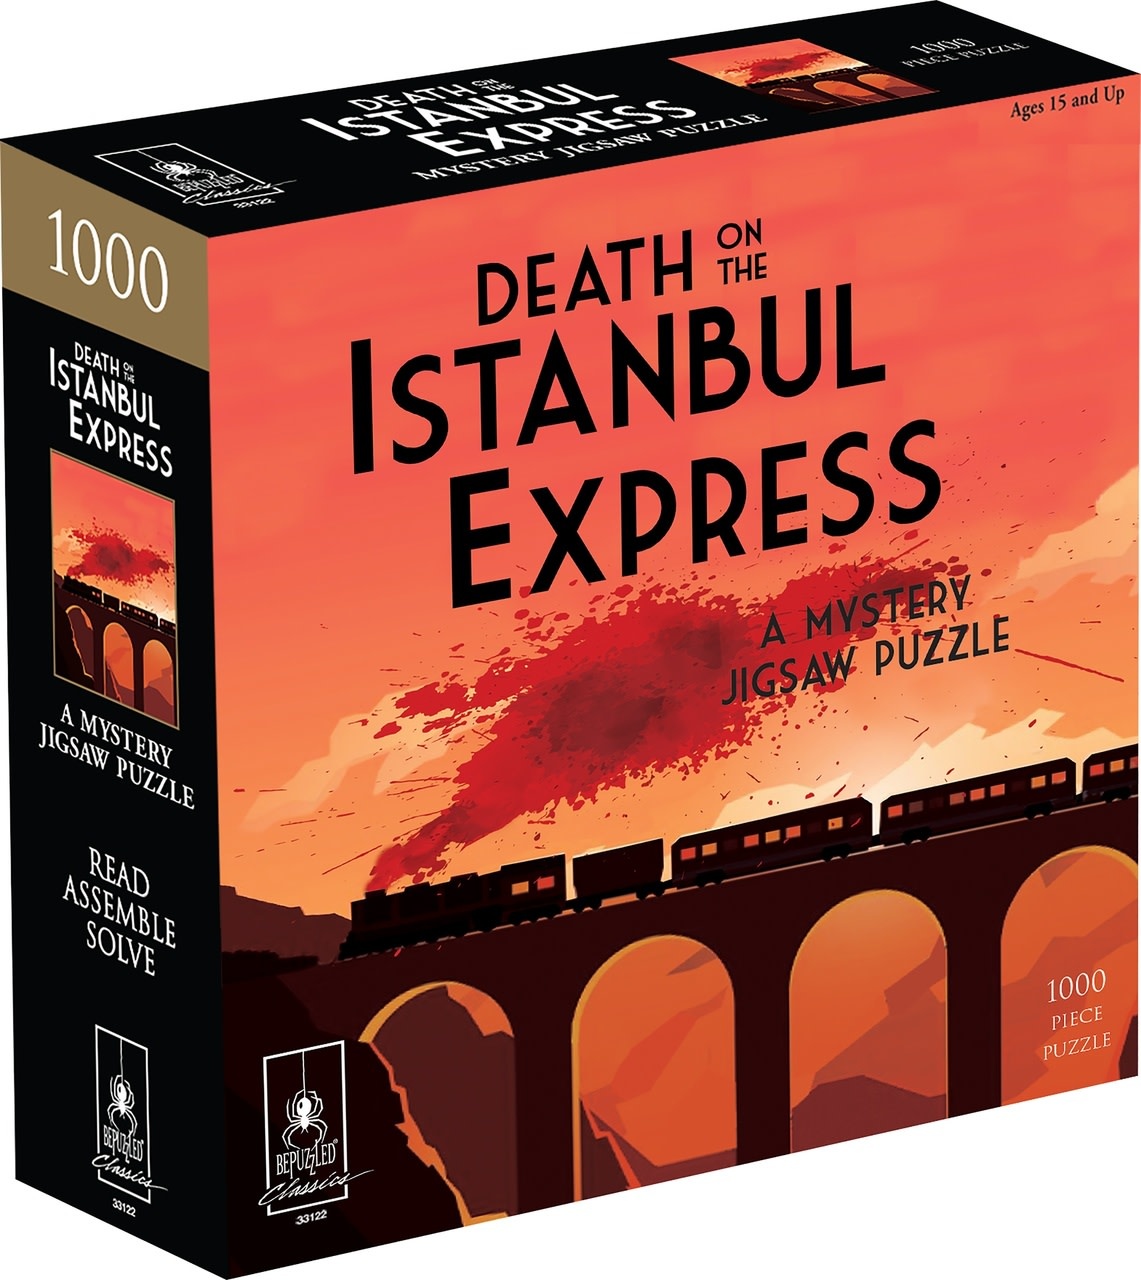 Mystery Puzzle - Death on the Istanbul Express